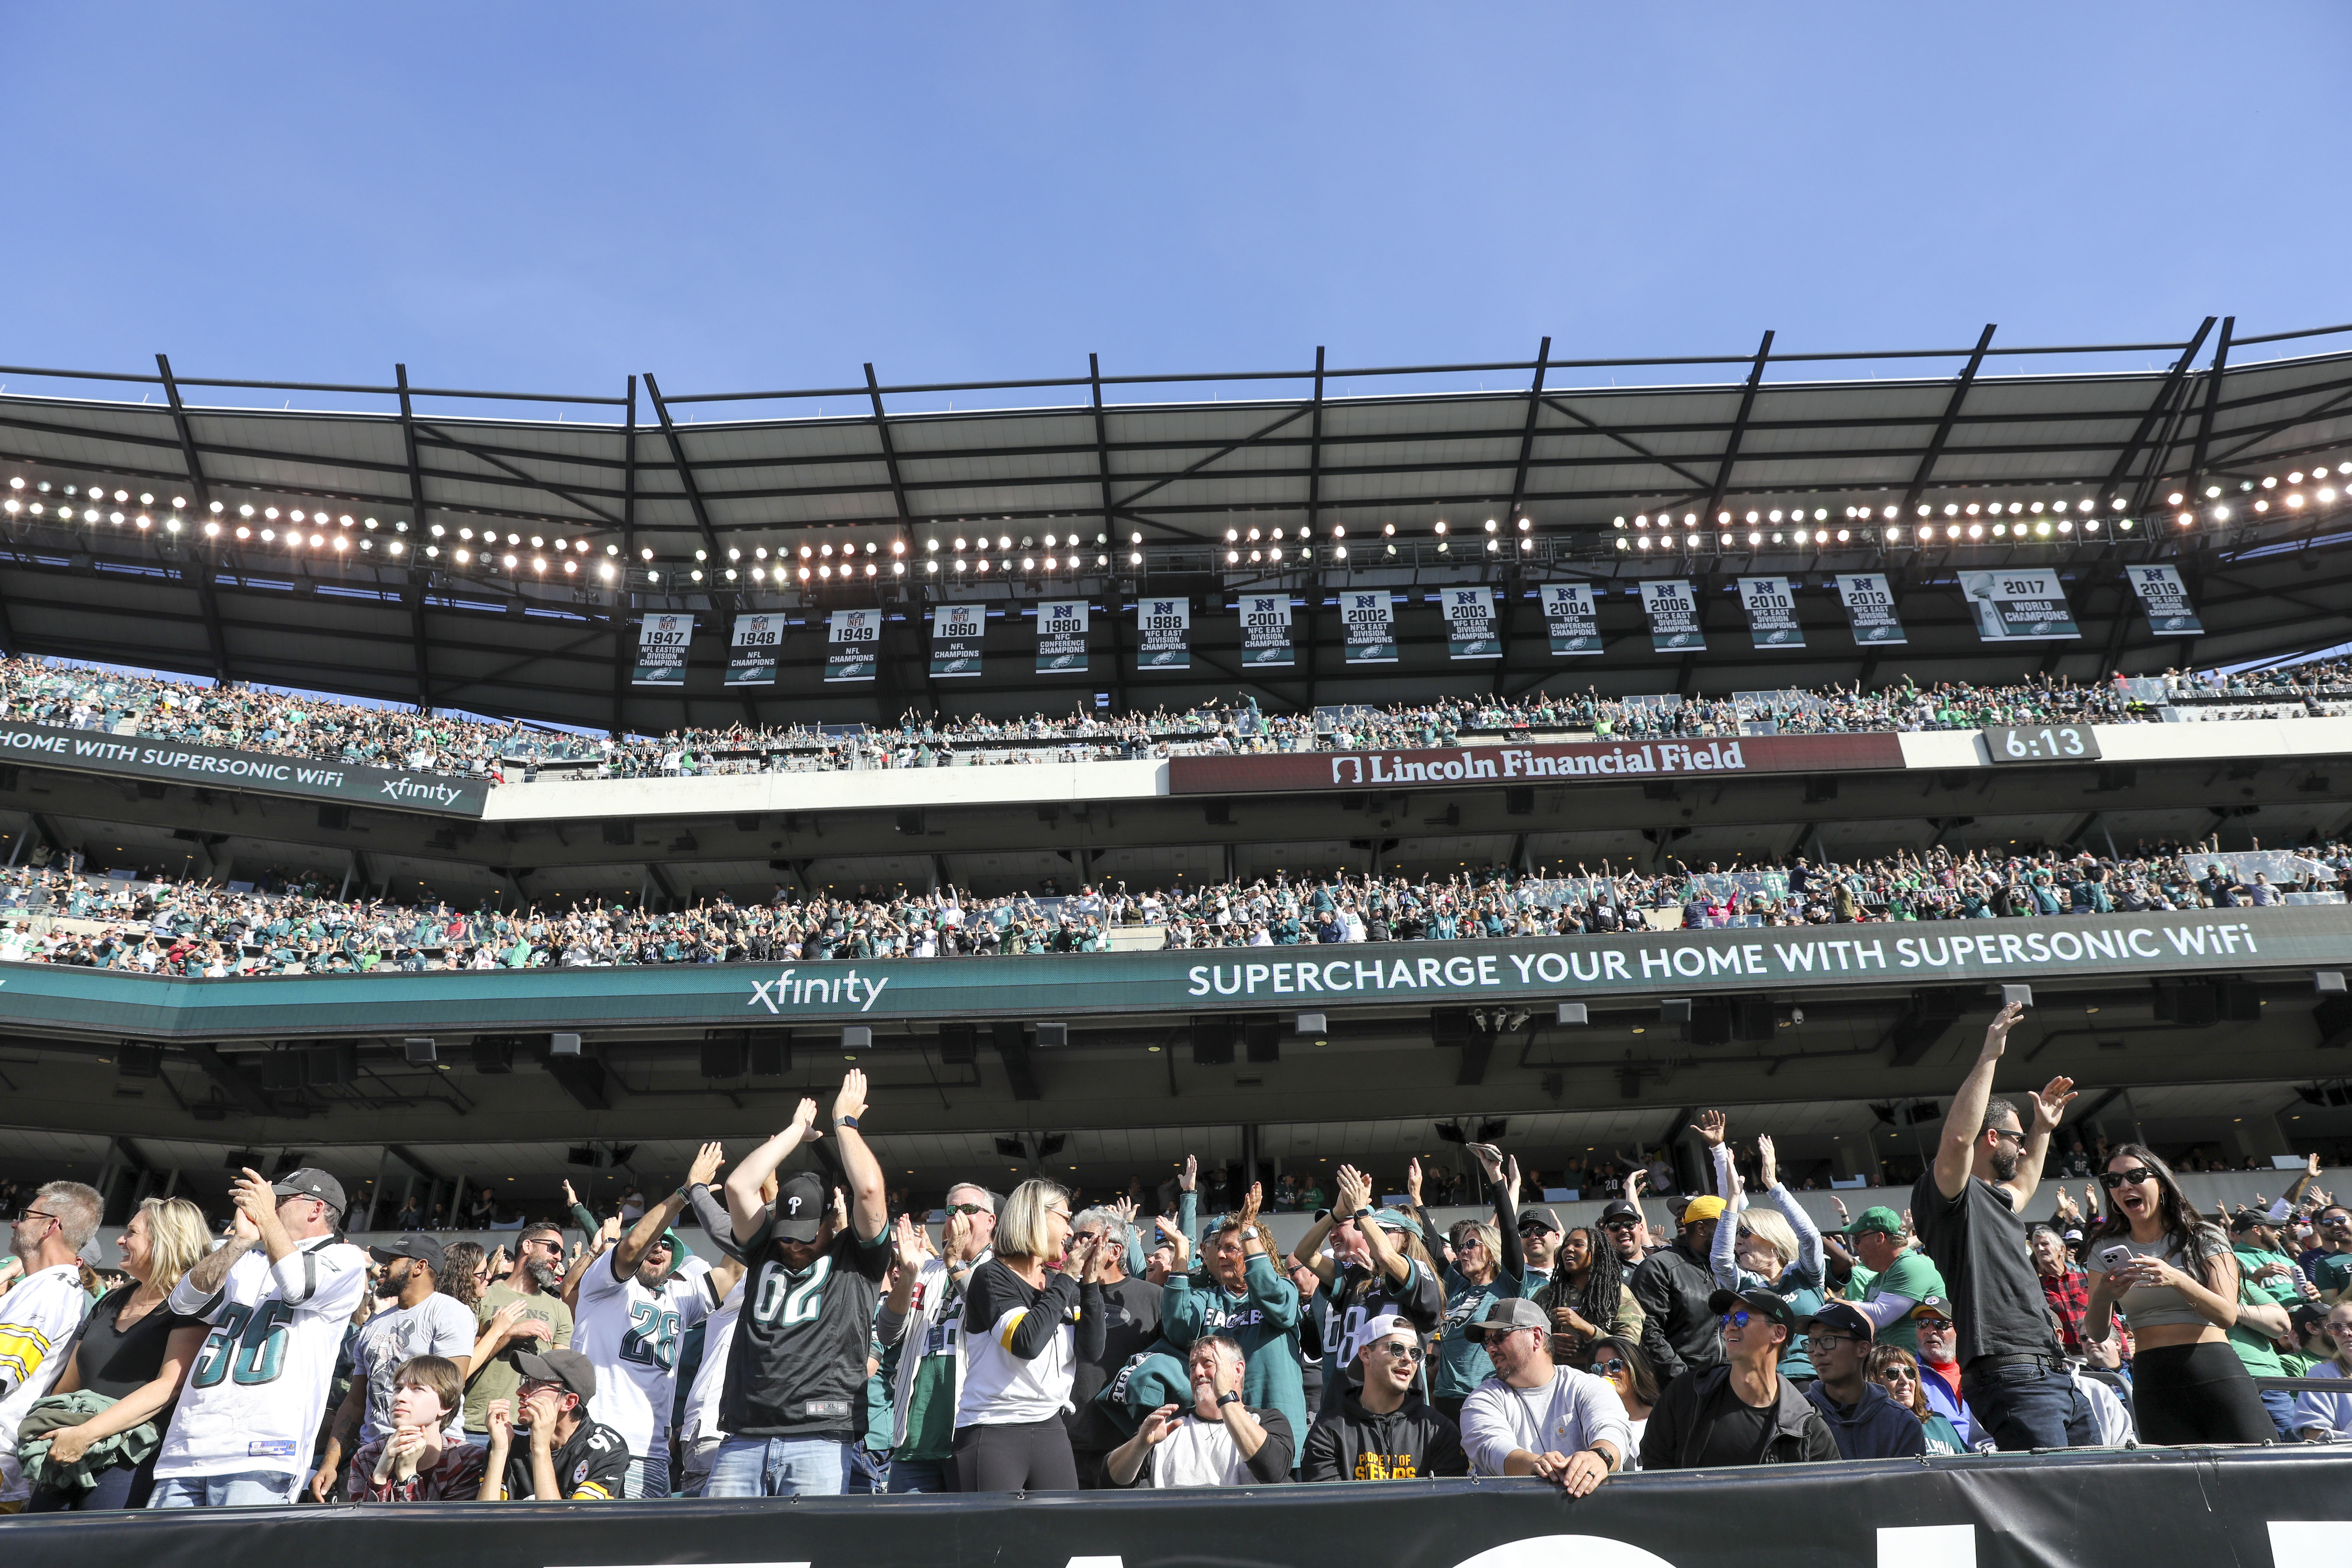 Eagles vs. Giants playoff tickets: How to buy them and what to avoid